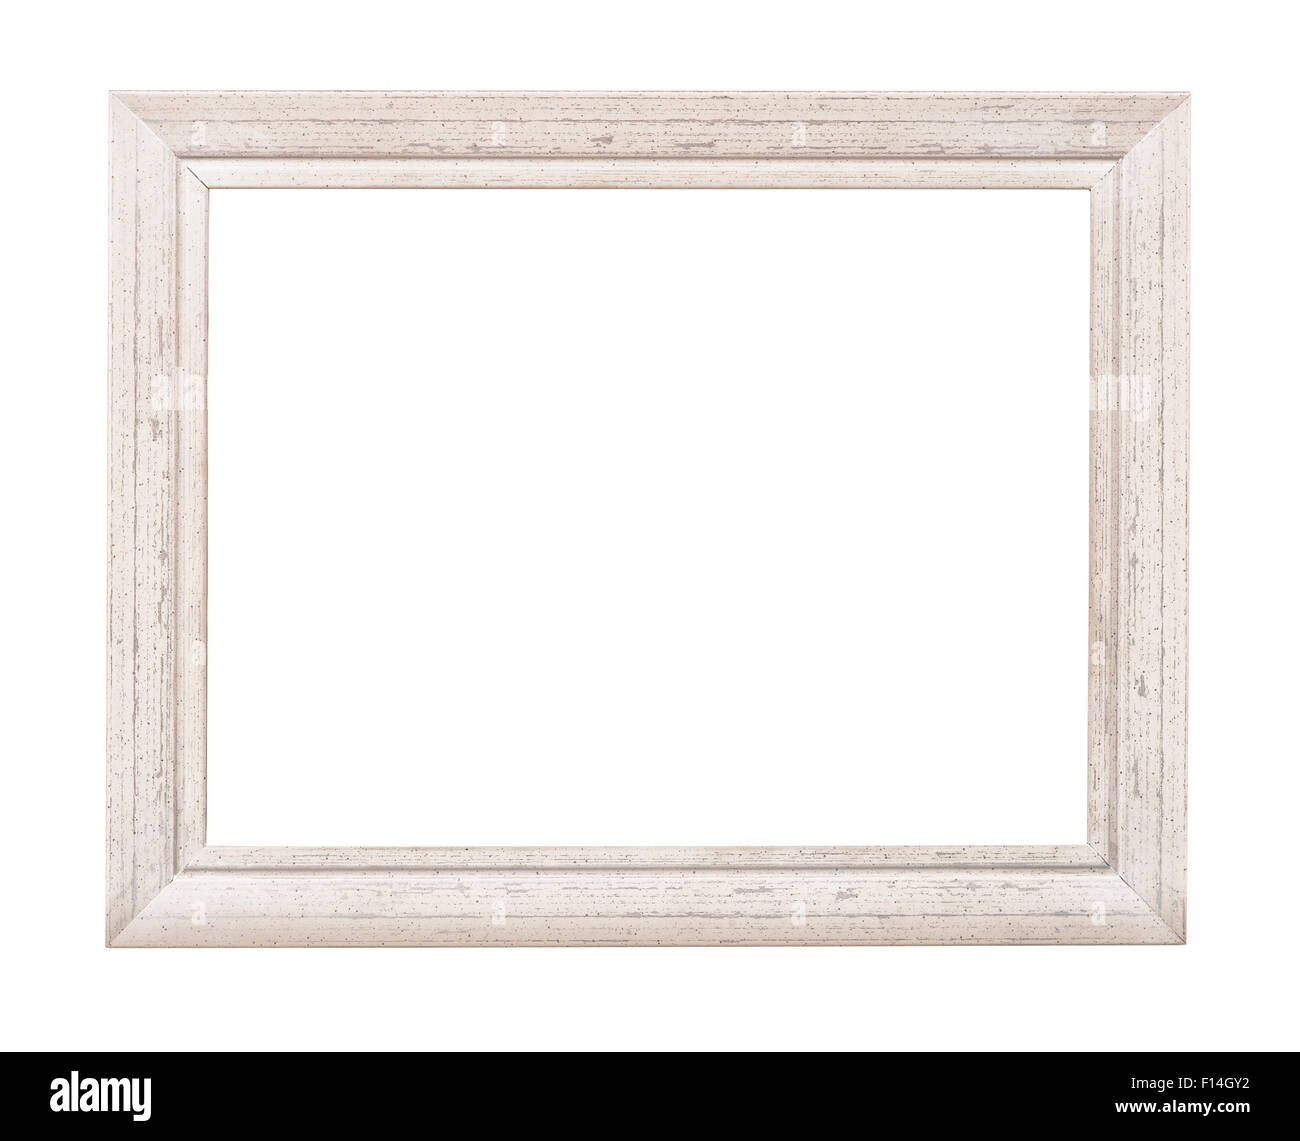 White rustic picture frame isolated on white Stock Photo